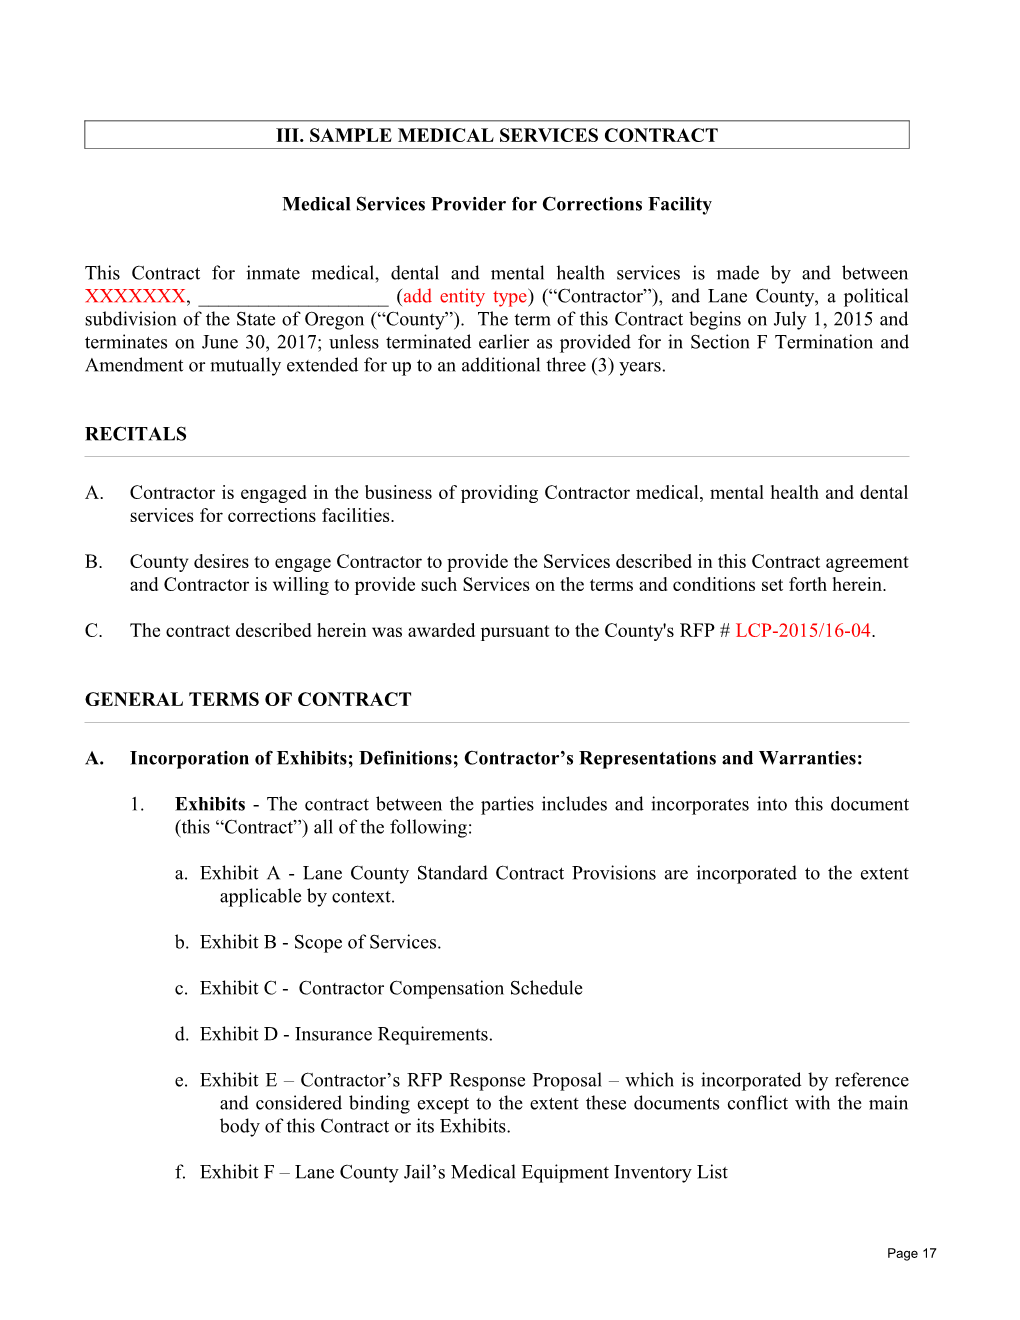 Iii. Sample Medical Services Contract